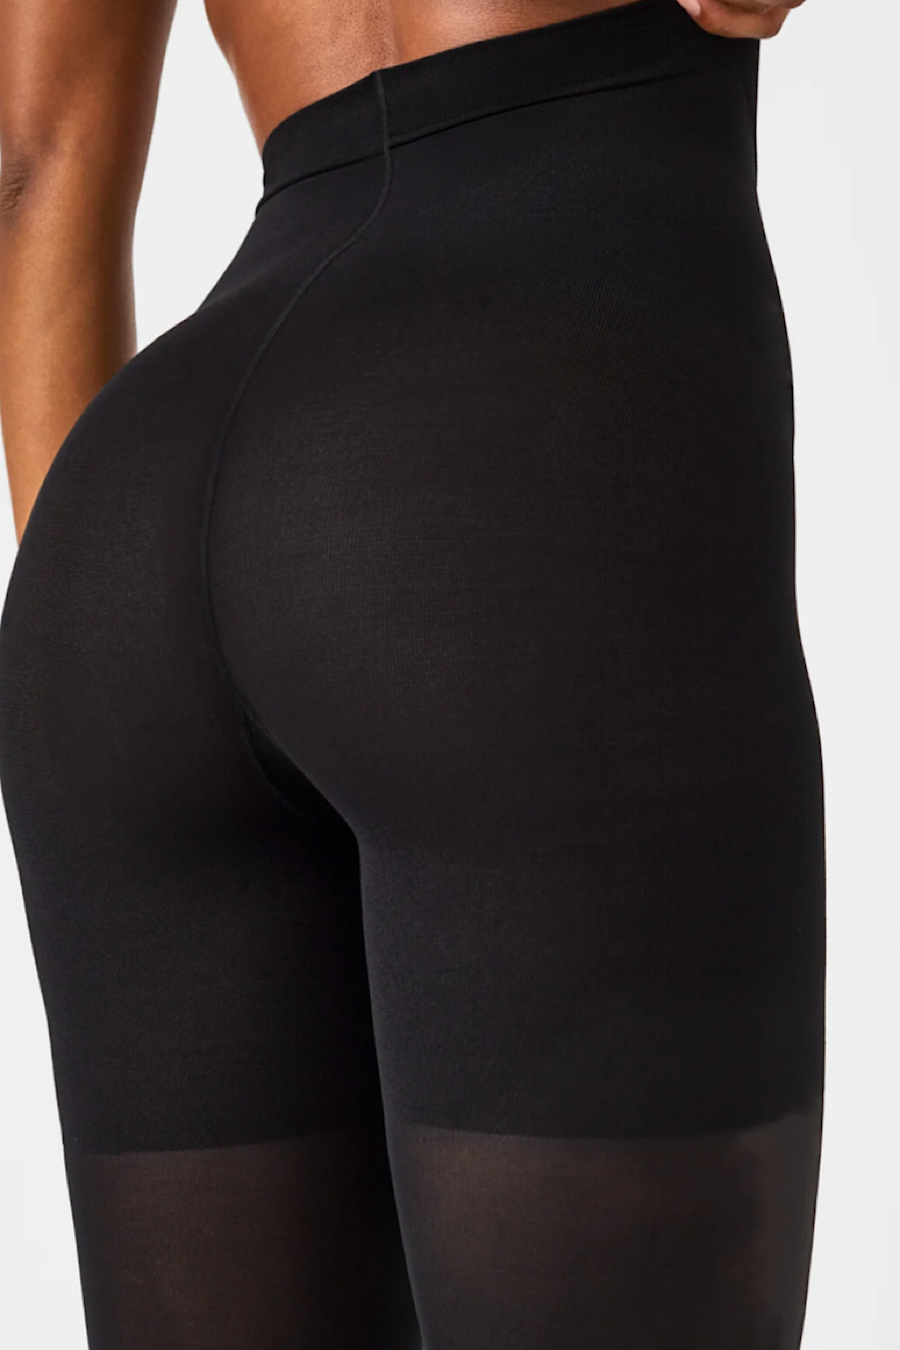 Spanx Tight-end tights 